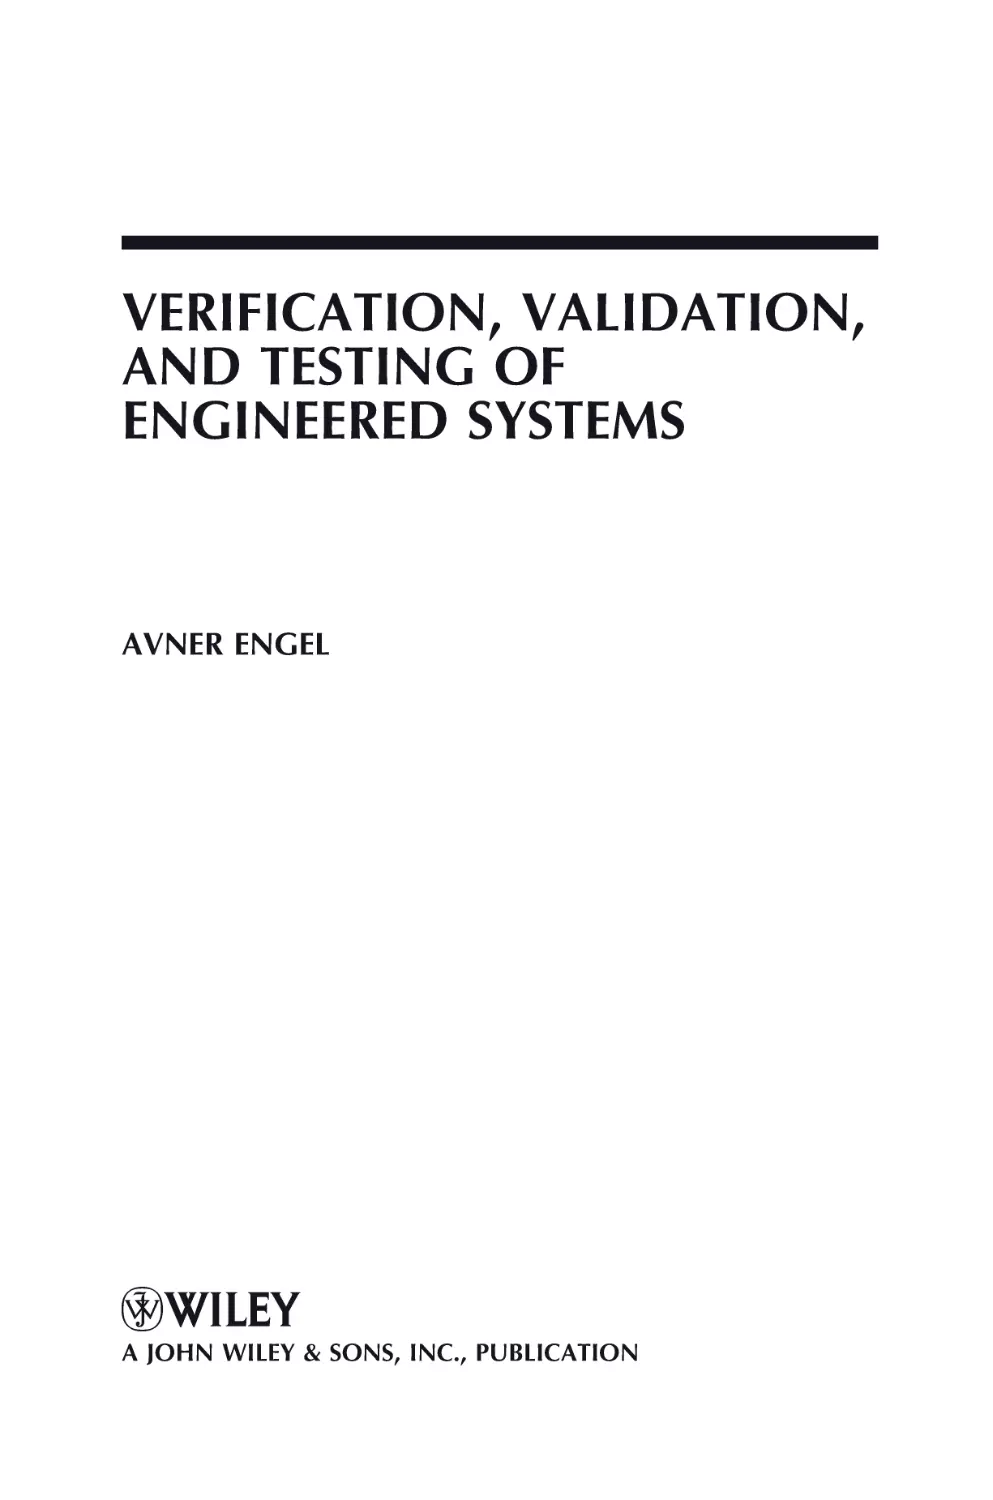 VERIFICATION, VALIDATION, AND TESTING OF ENGINEERED SYSTEMS